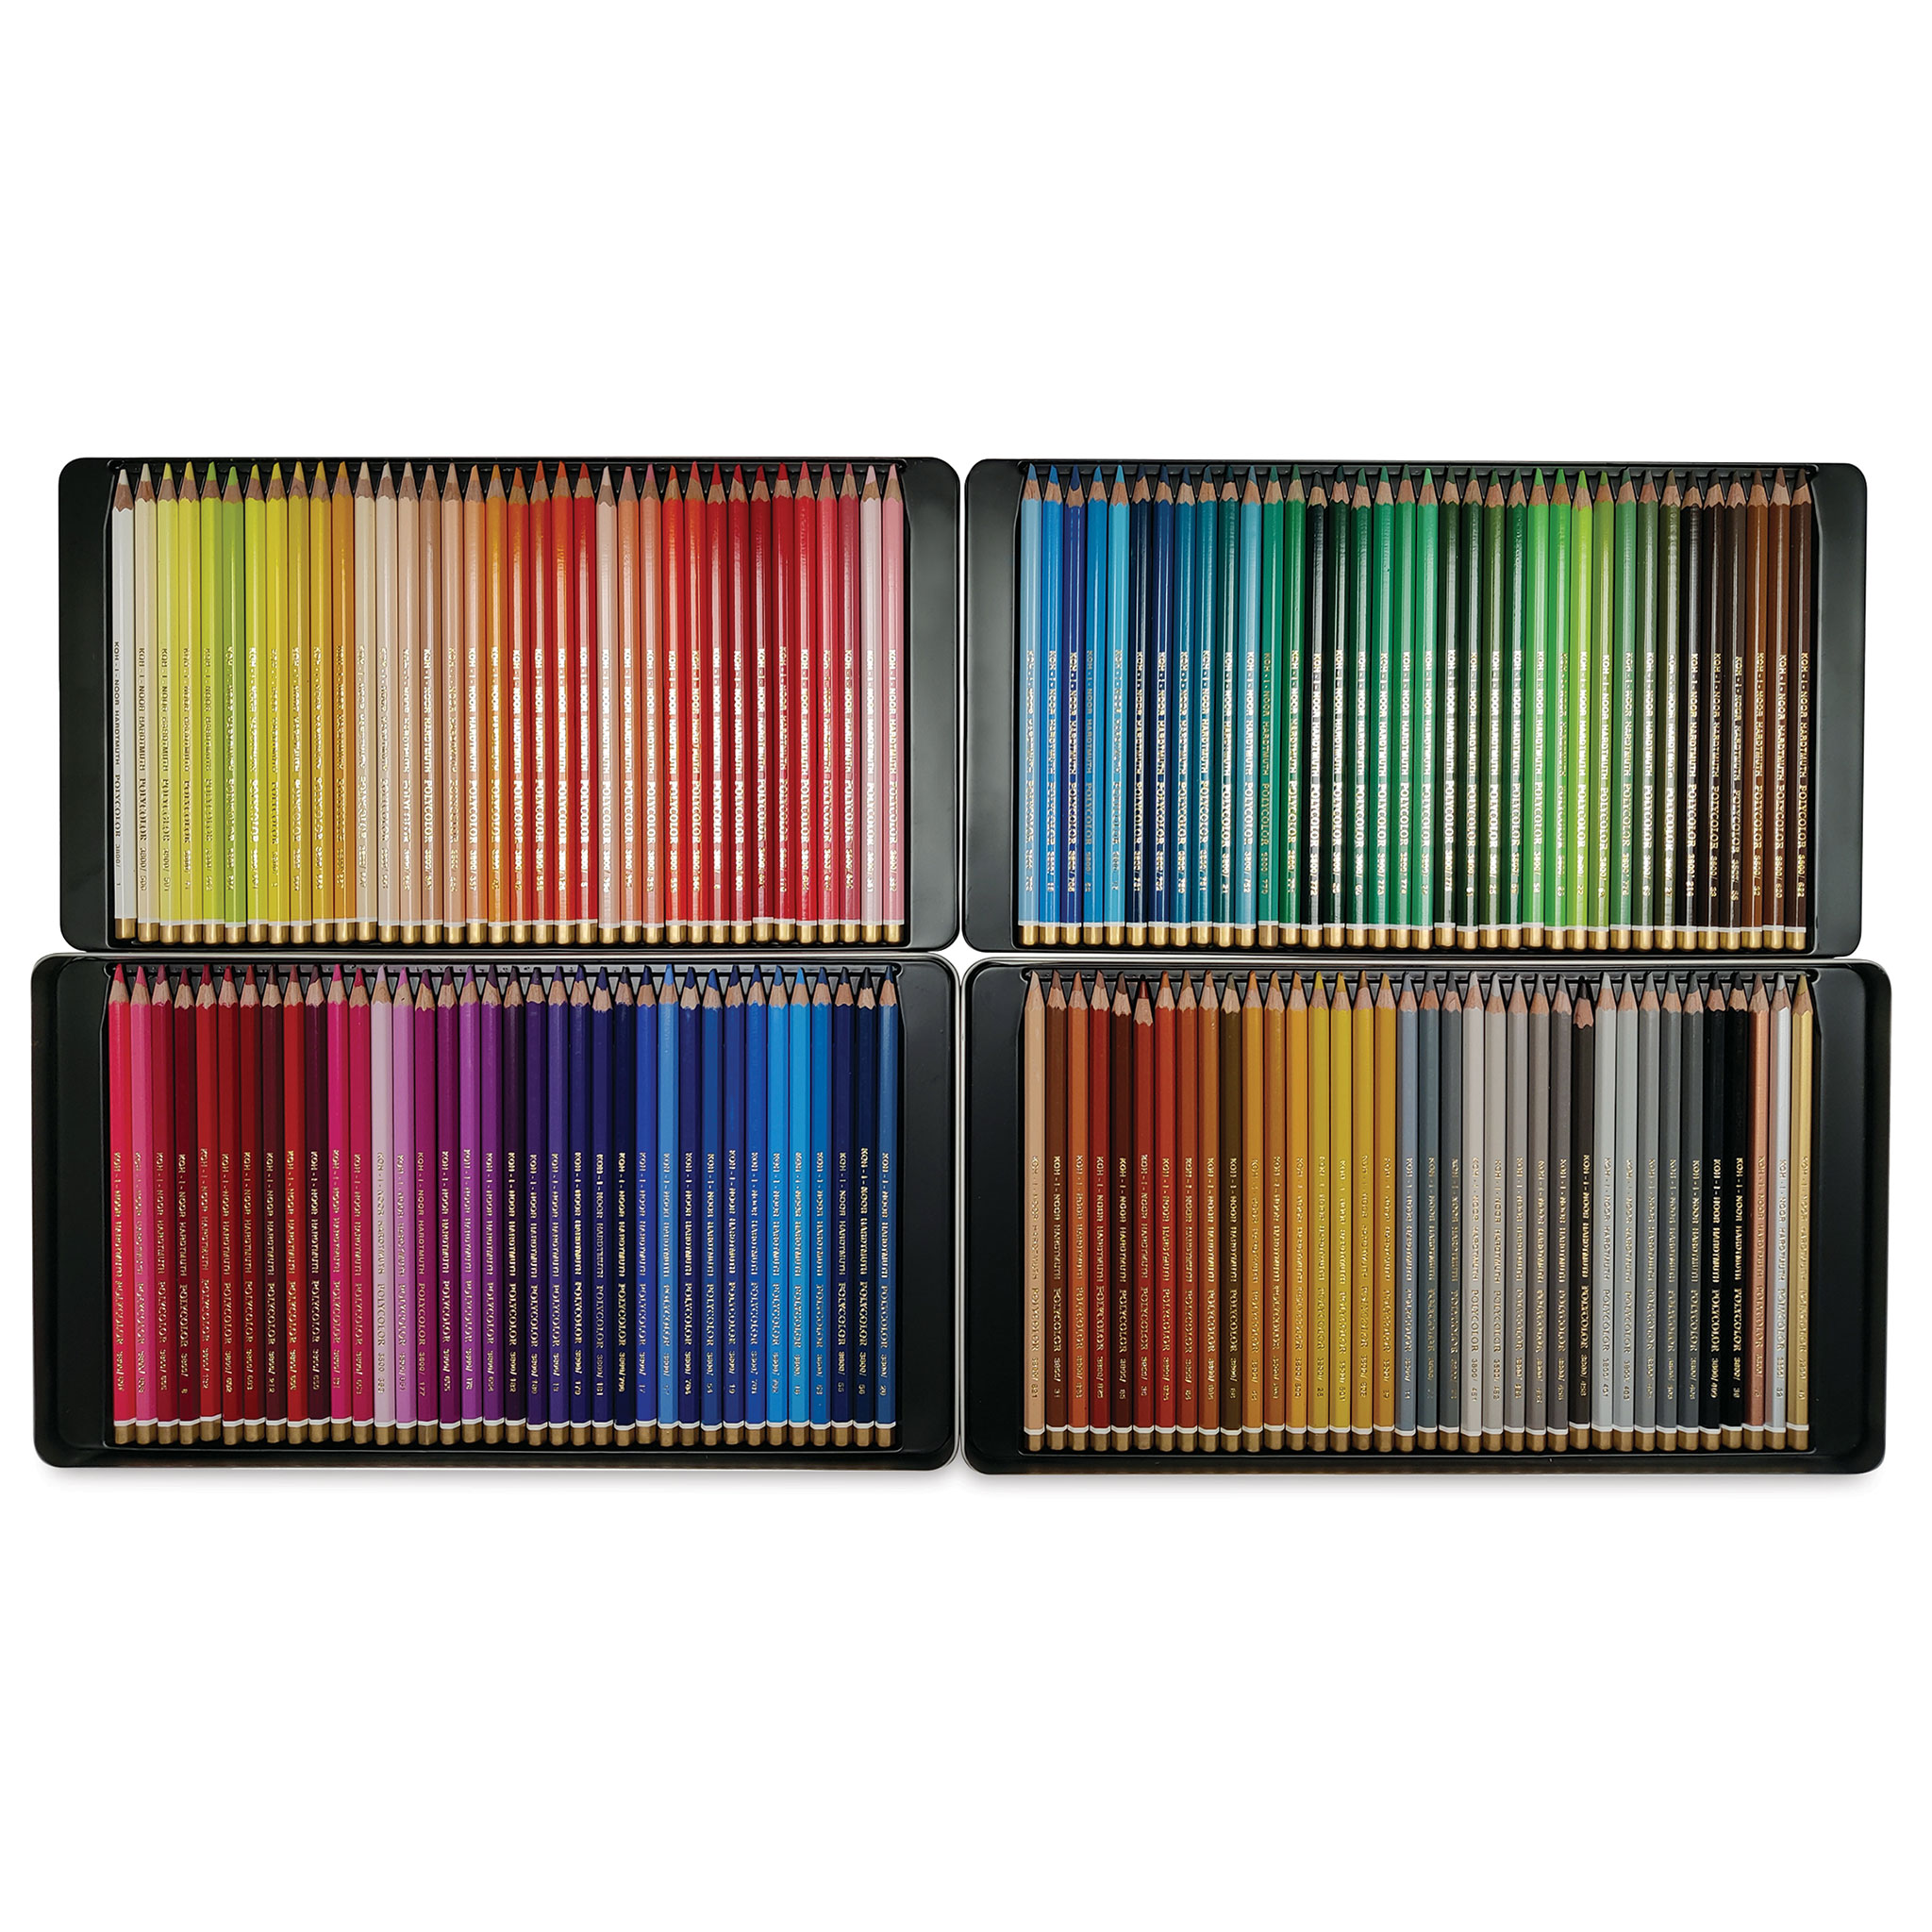 Best Metallic Colored Pencils - Discussion and Top Picks